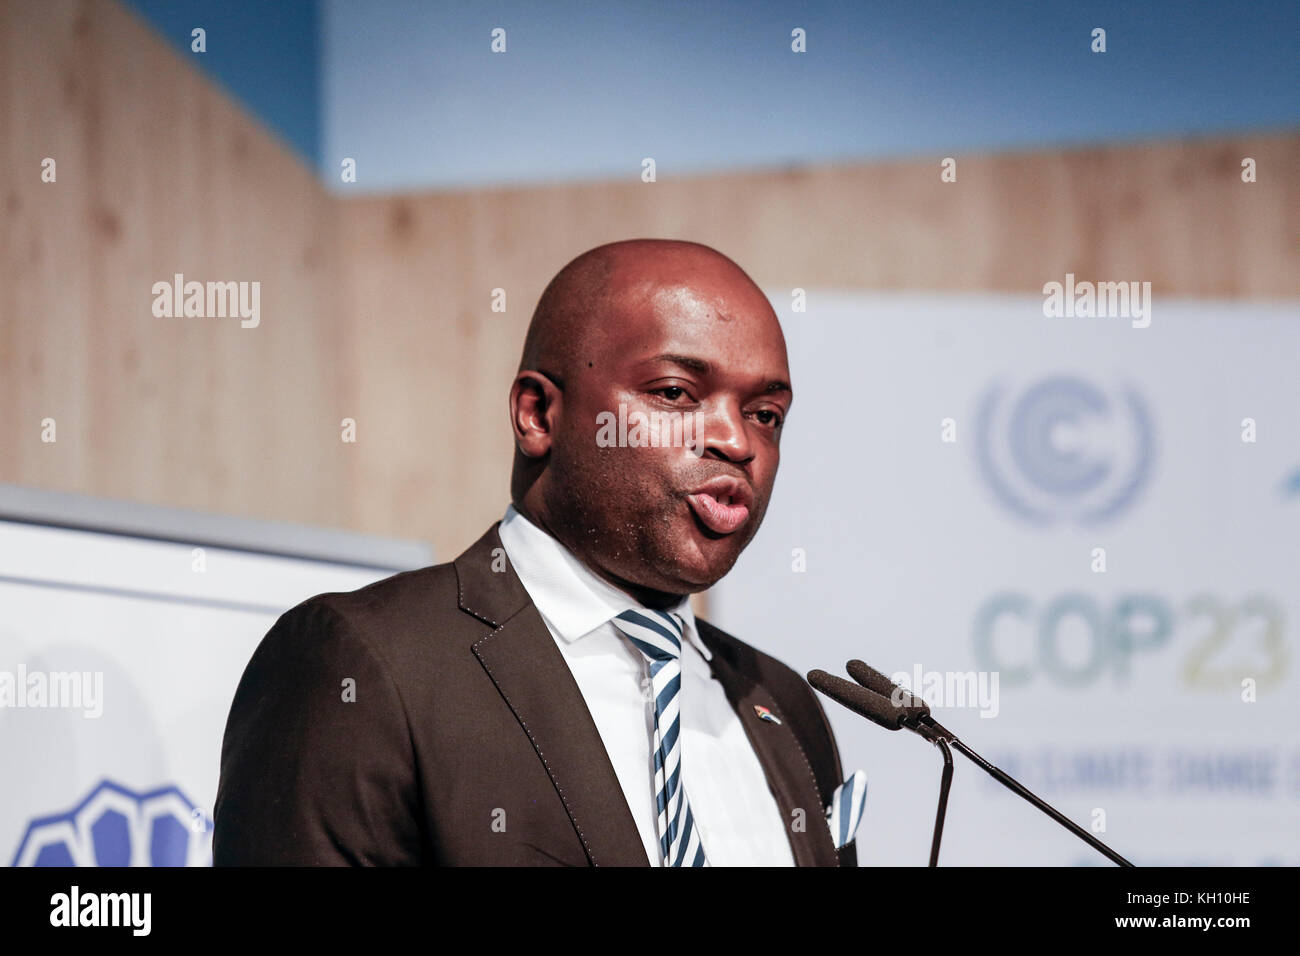 Bonn, Germany. 12th Nov, 2017. Solly Tshepiso Msimanga from South Africa at the COP23 Fiji conference in Bonn, Germany on the 12th of November 2017. COP23 if organized by UN Framework Convention for Climate Change. Fiji holds presidency over this meeting in Bonn. Credit: Dominika Zarzycka/Alamy Live News Stock Photo